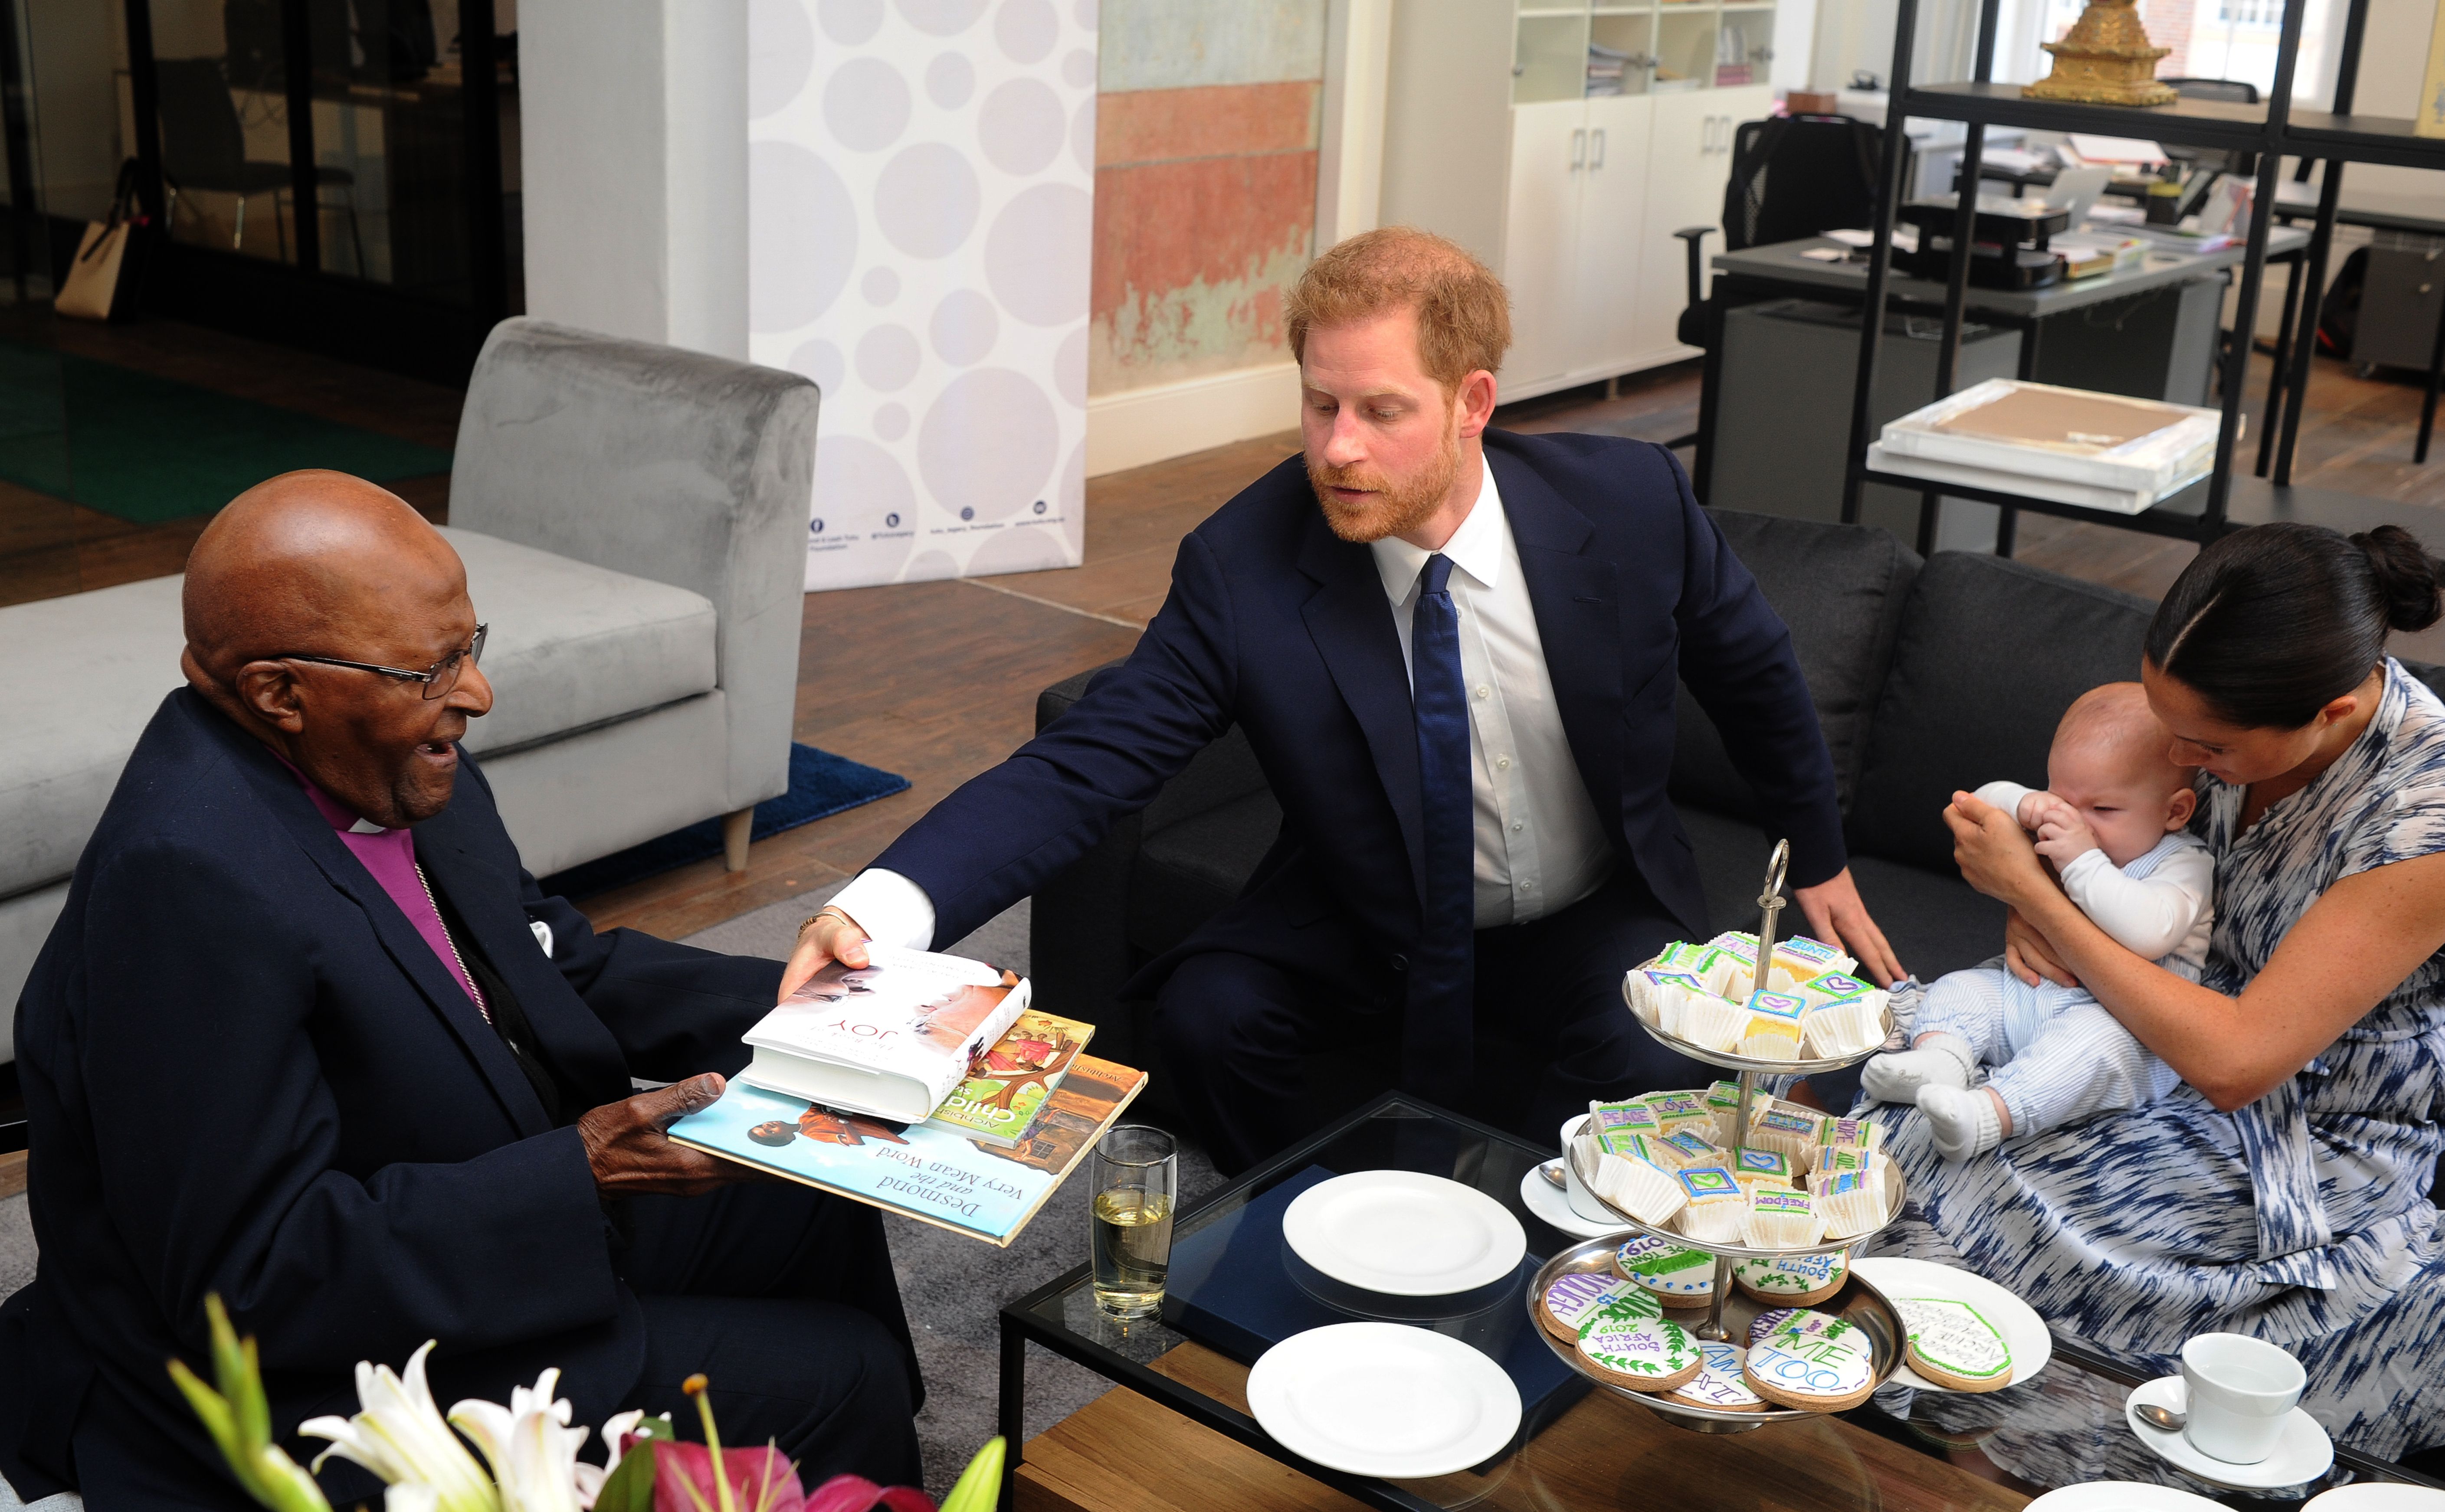 Archbishop Desmond Tutu offers gifts to the Sussexes during their visit. Henk Kruger/AFP/Getty Images